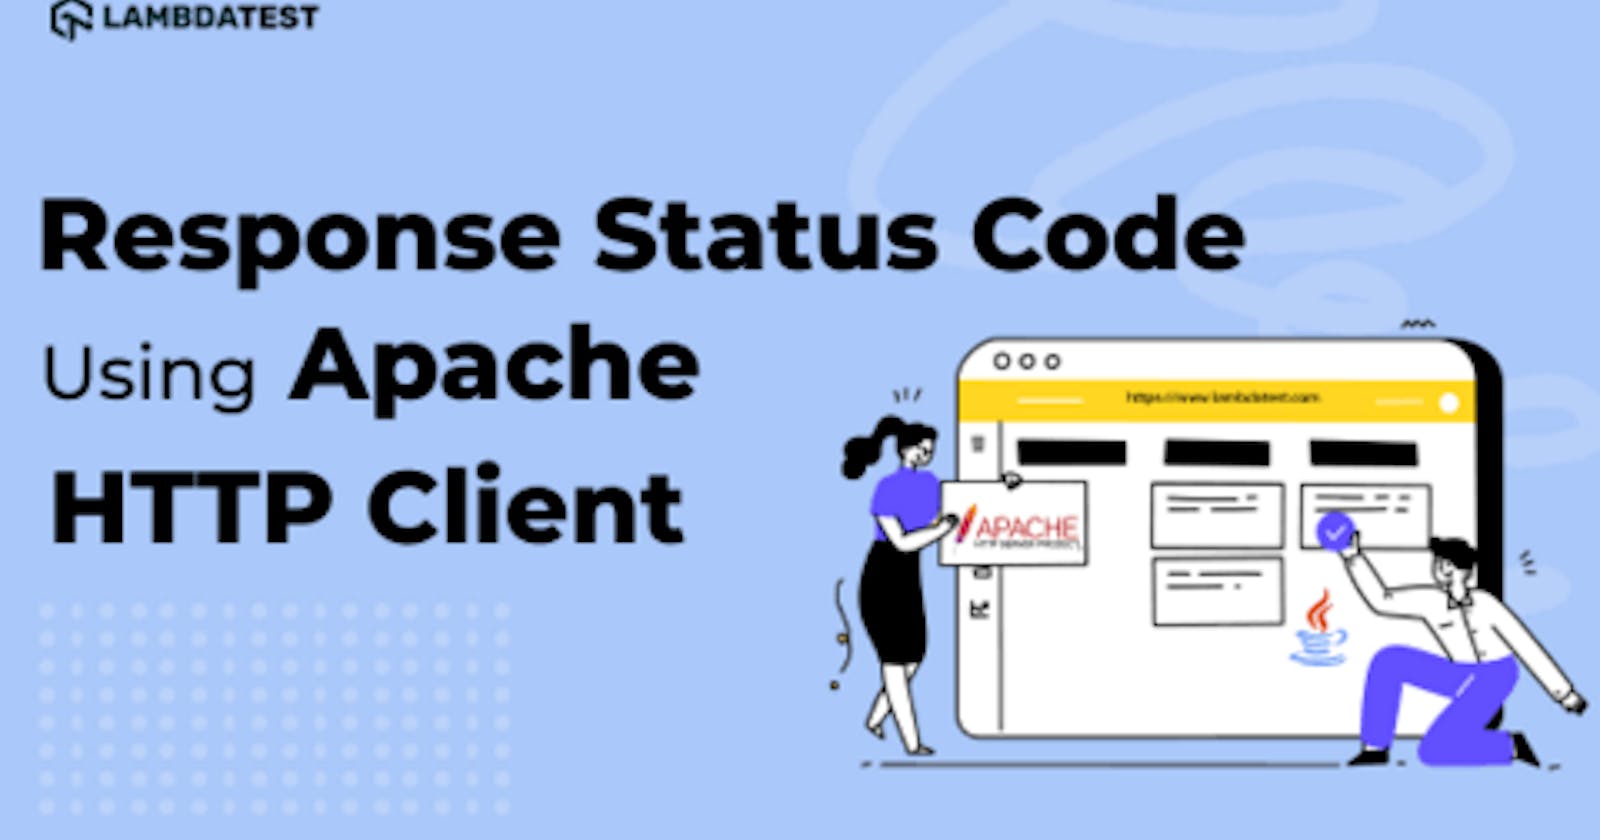 How To Get Response Status Code Using Apache HTTP Client?